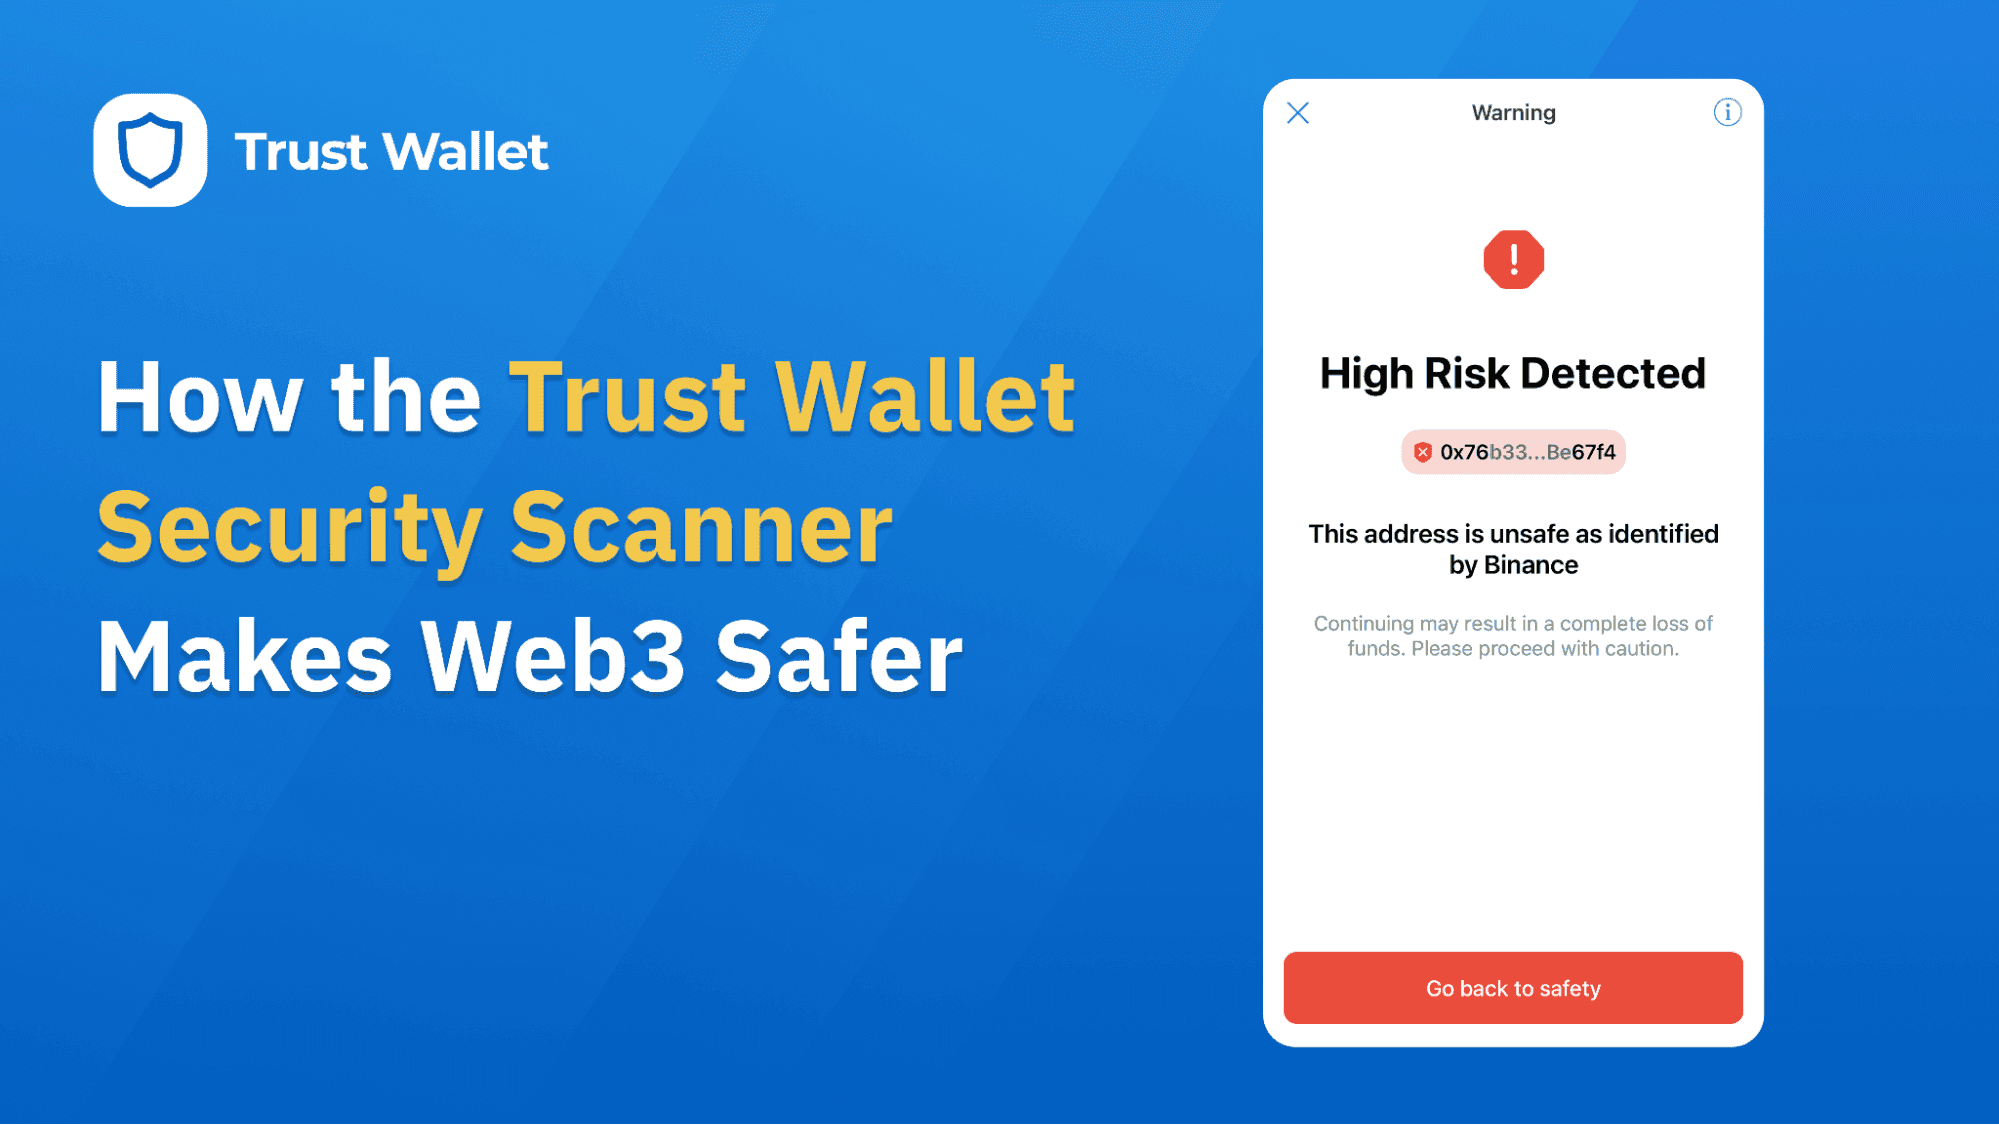 How the Trust Wallet Security Scanner Makes Web3 Safer